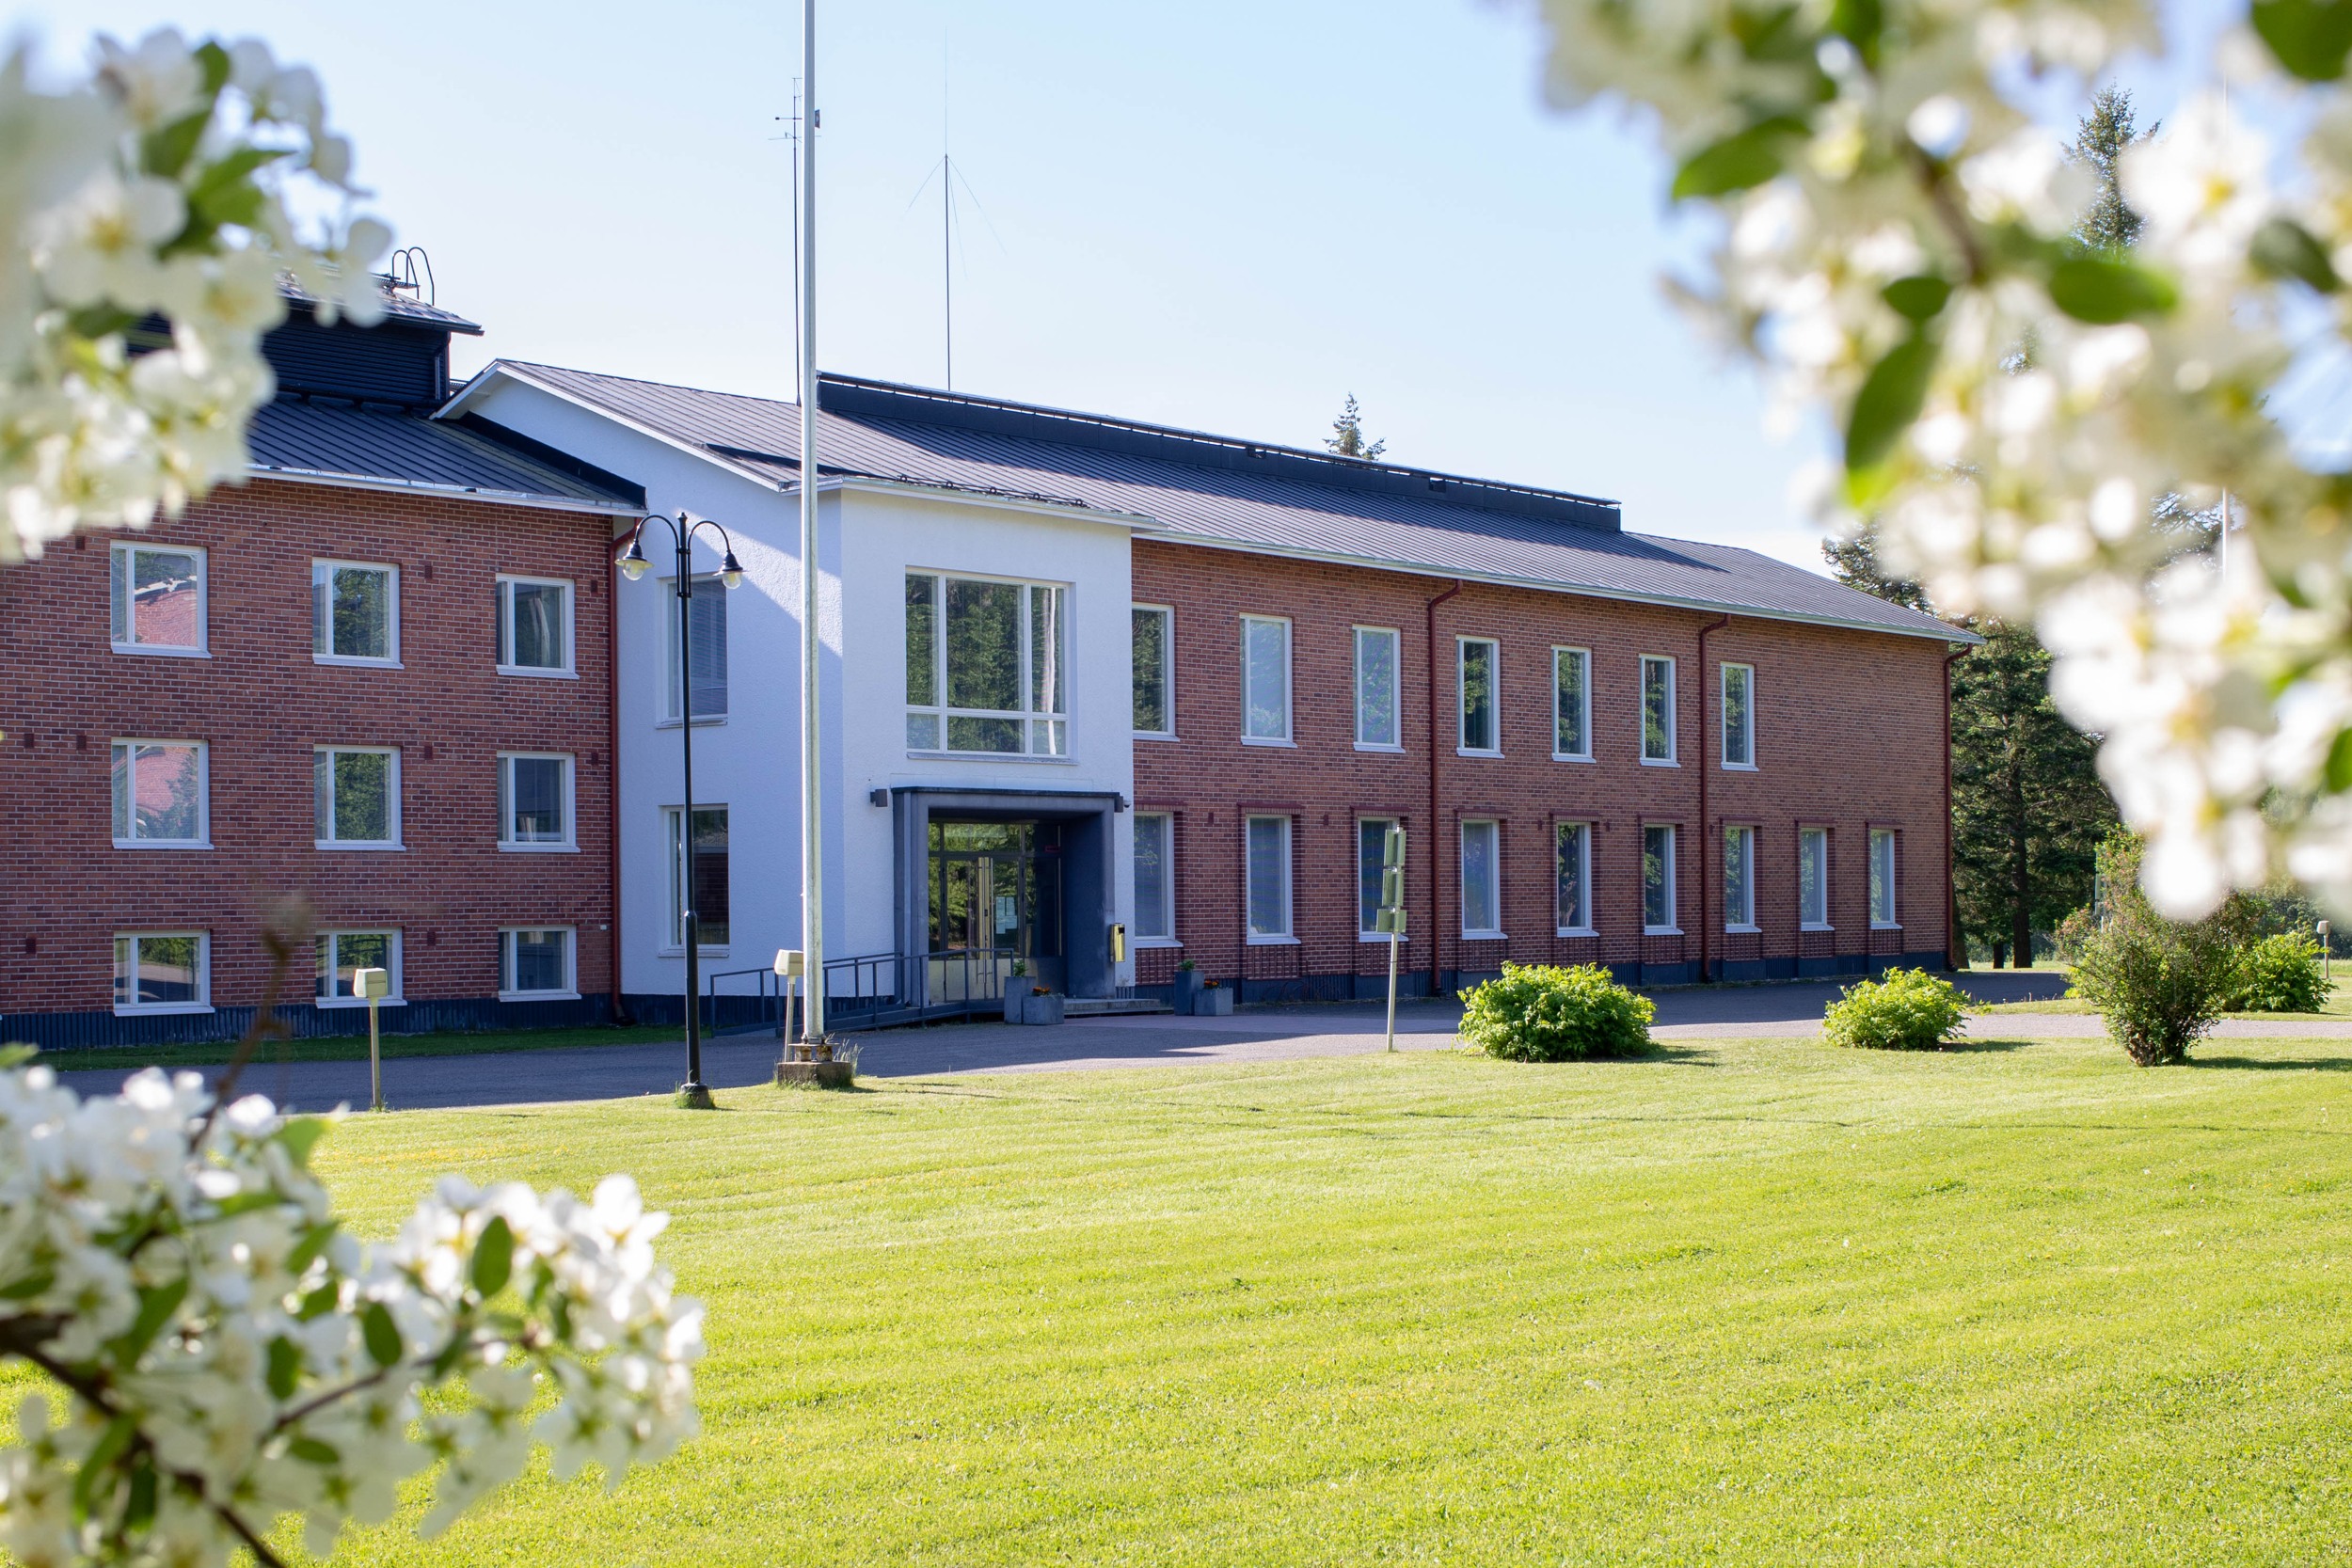 The main building of the Mustiala campus. Red brick two-storey building. Lawn and flowering trees in the foreground.